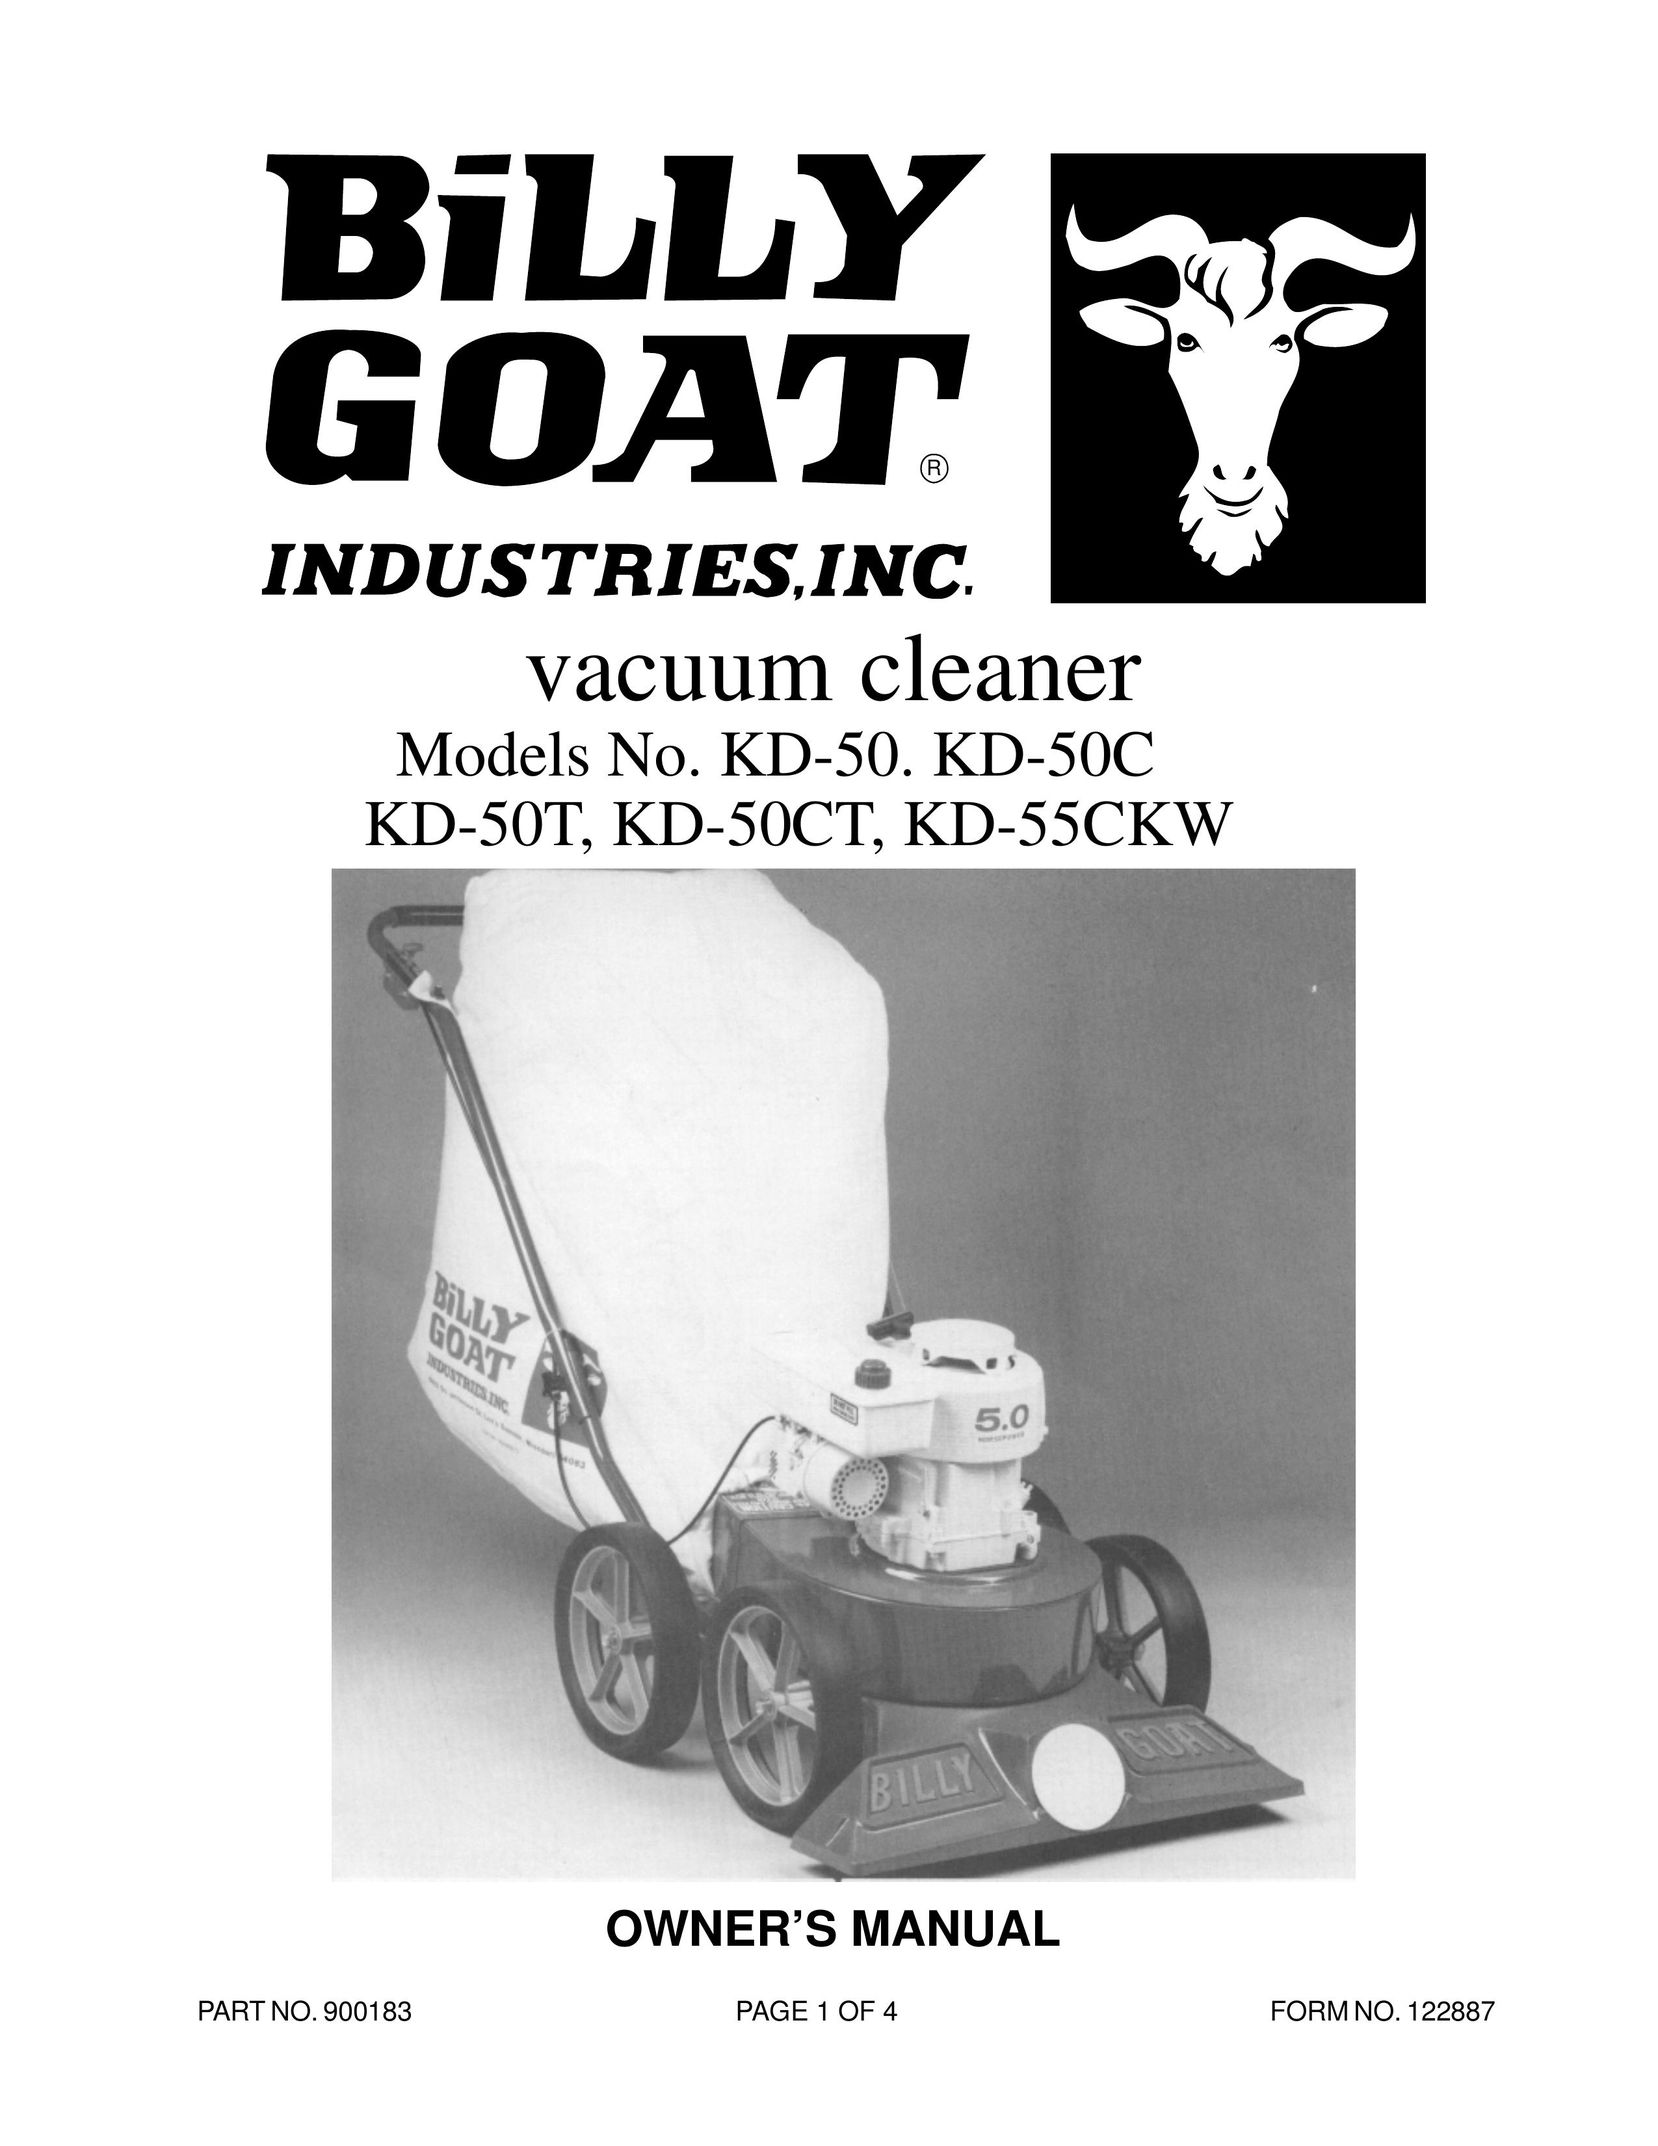 Billy Goat KD-55CKW Vacuum Cleaner User Manual